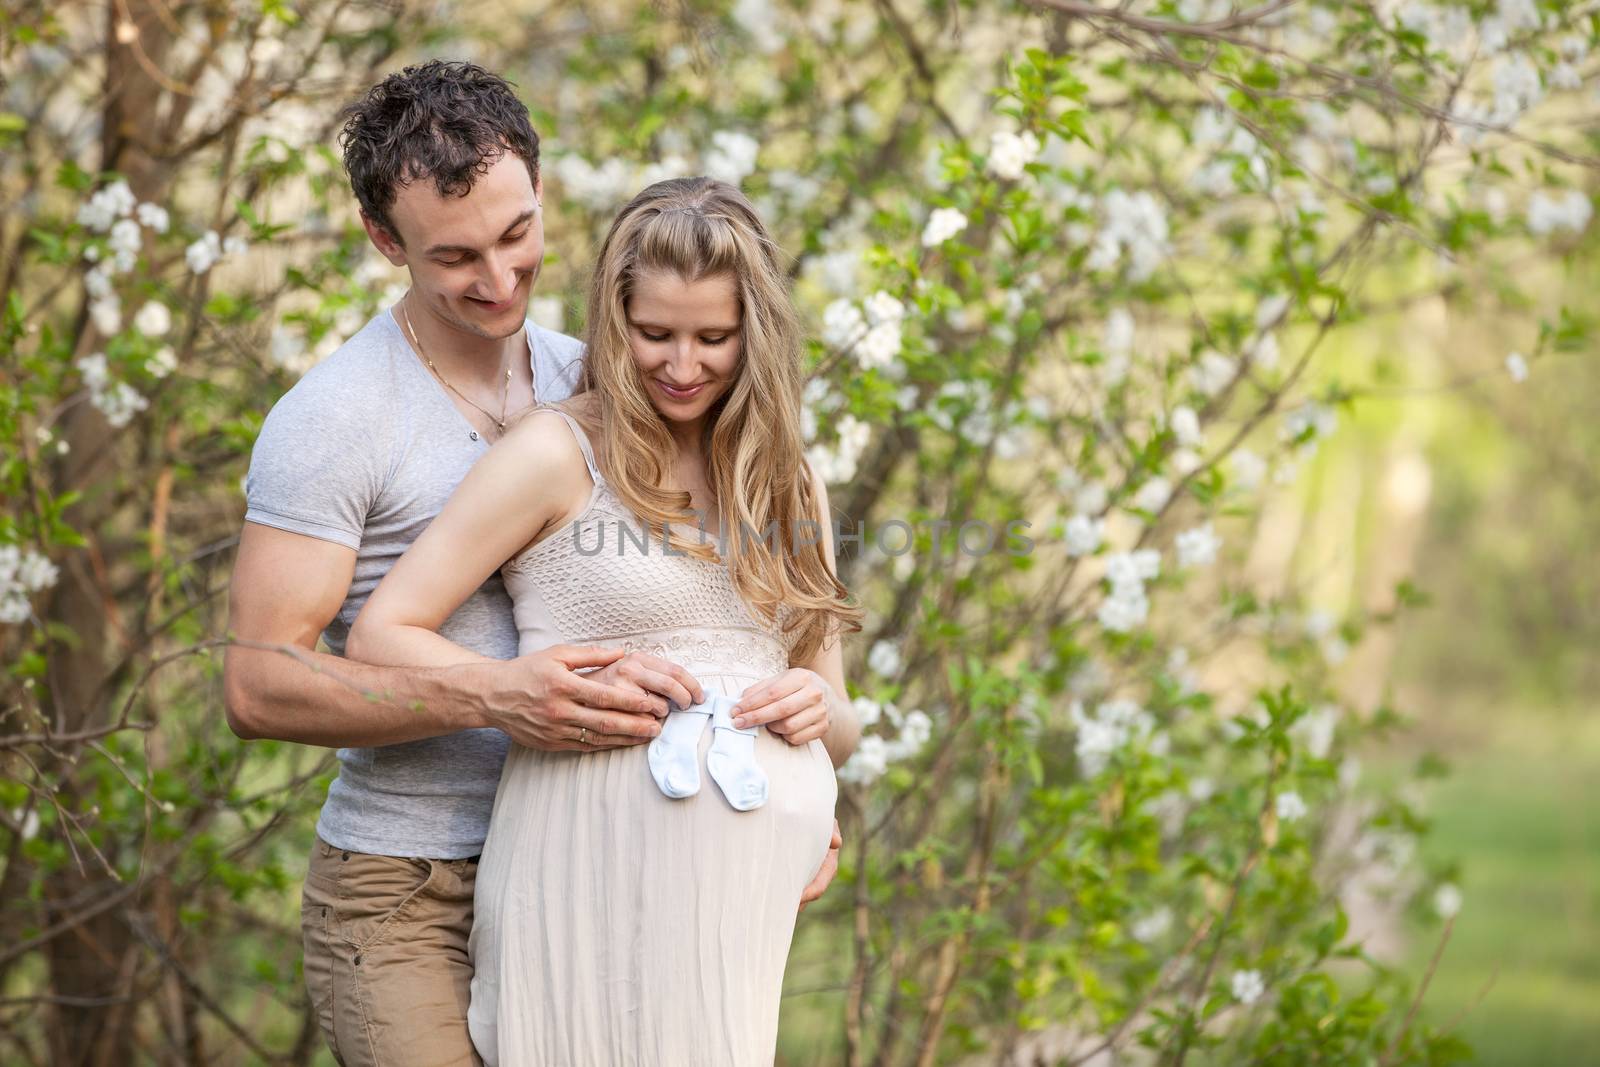 Young pregnant couple outdoors in spring blossom